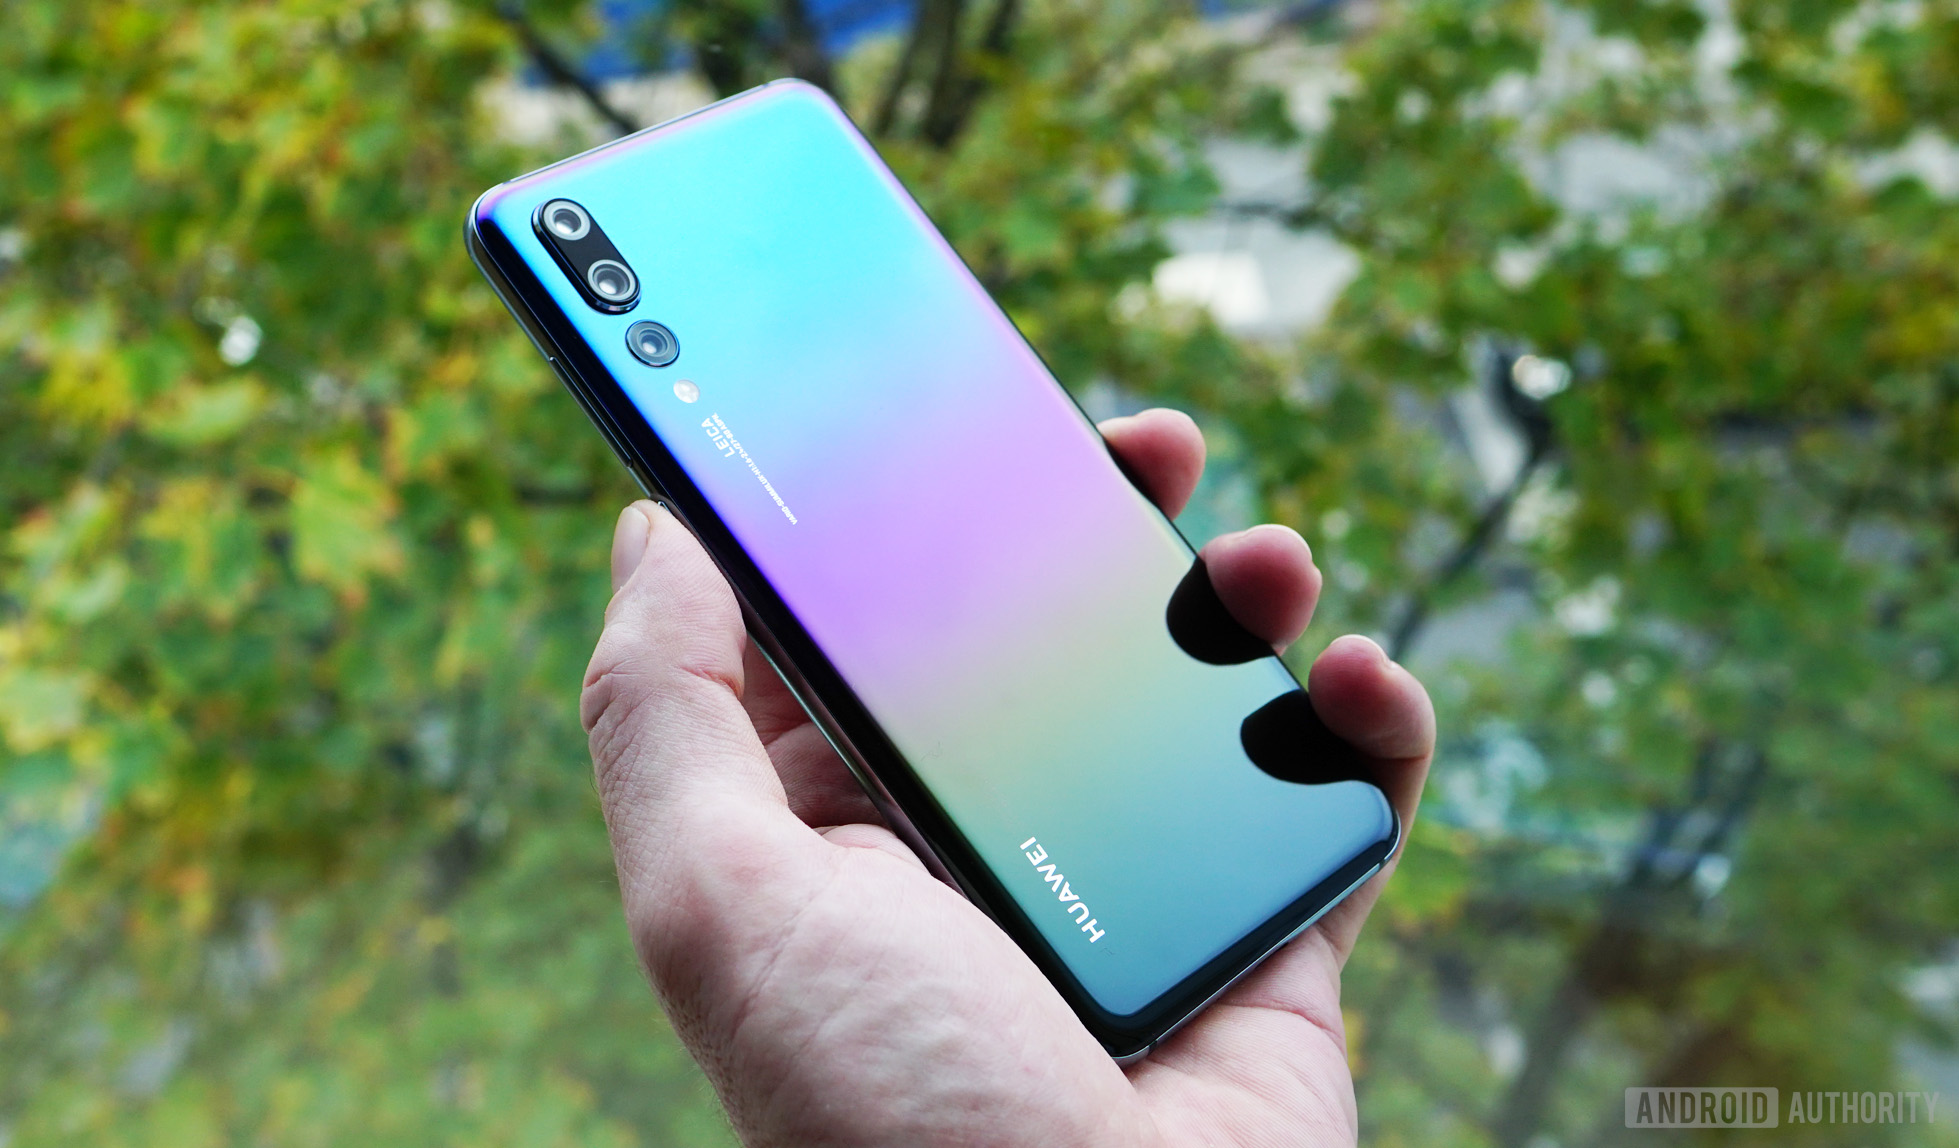 The HUAWEI P20 Pro in a new gradient color.